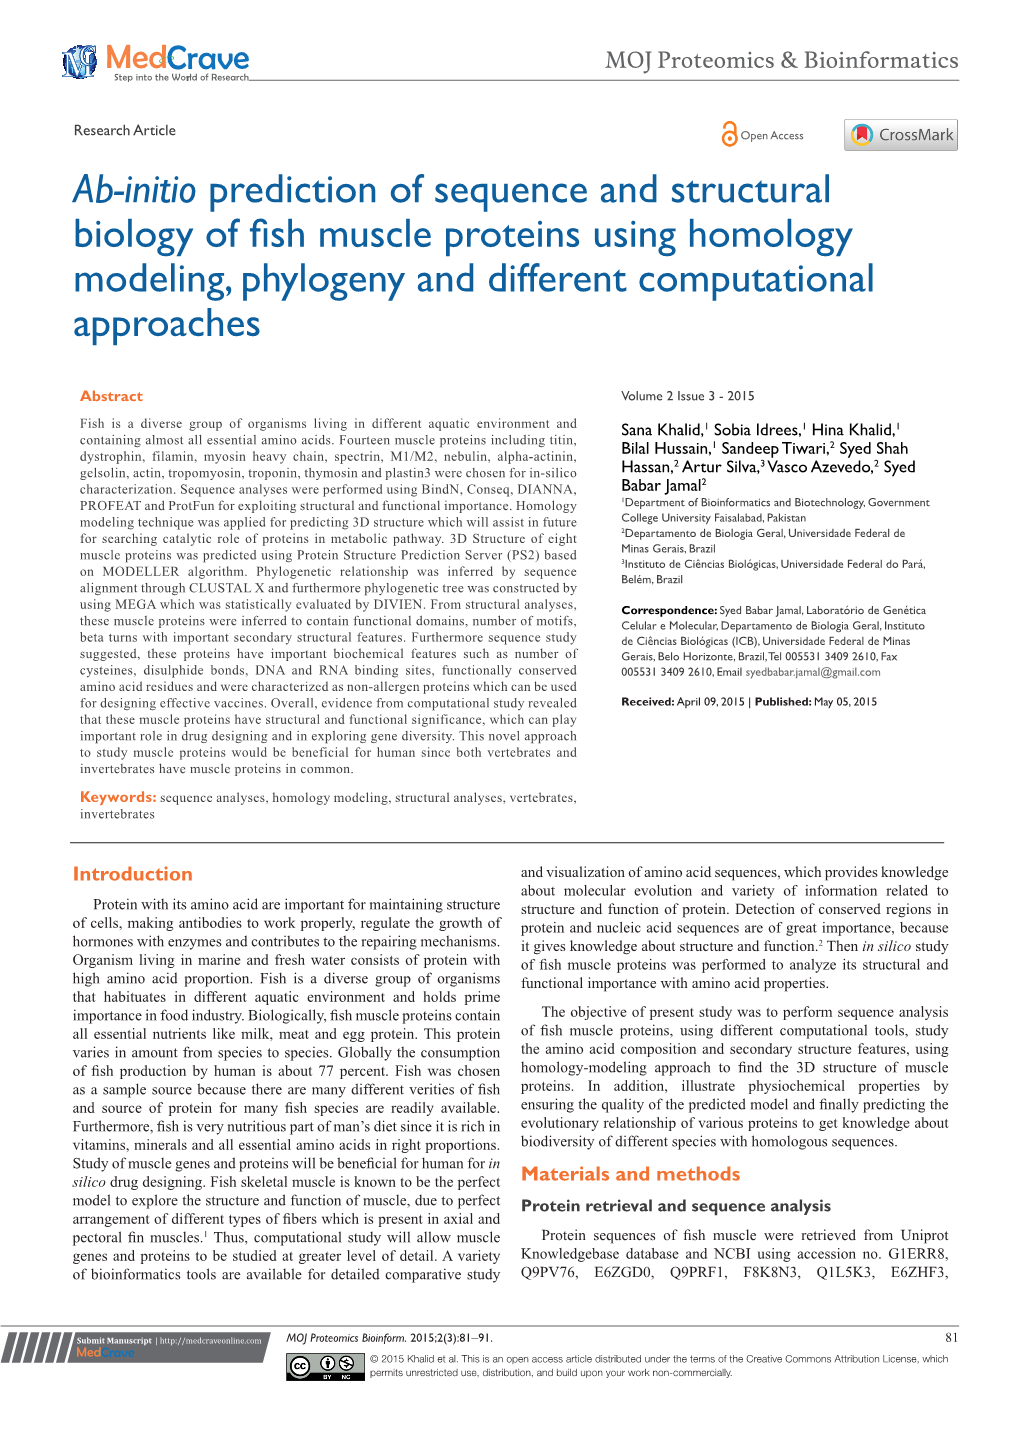 Ab-Initio Prediction of Sequence and Structural Biology of Fish Muscle Proteins Using Homology Modeling, Phylogeny and Different Computational Approaches